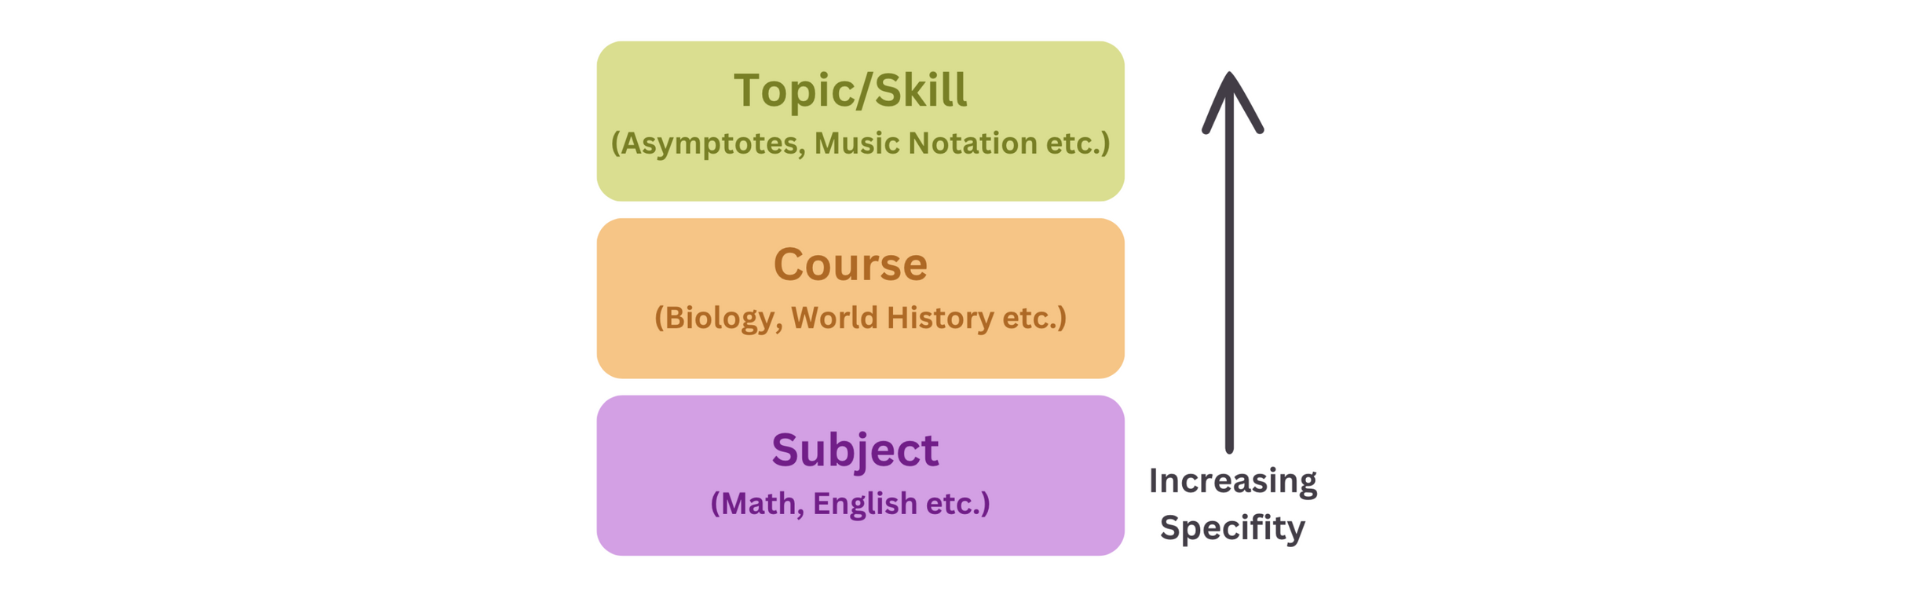 Topic skill, course, subject tagging hierarchy - grows more specific